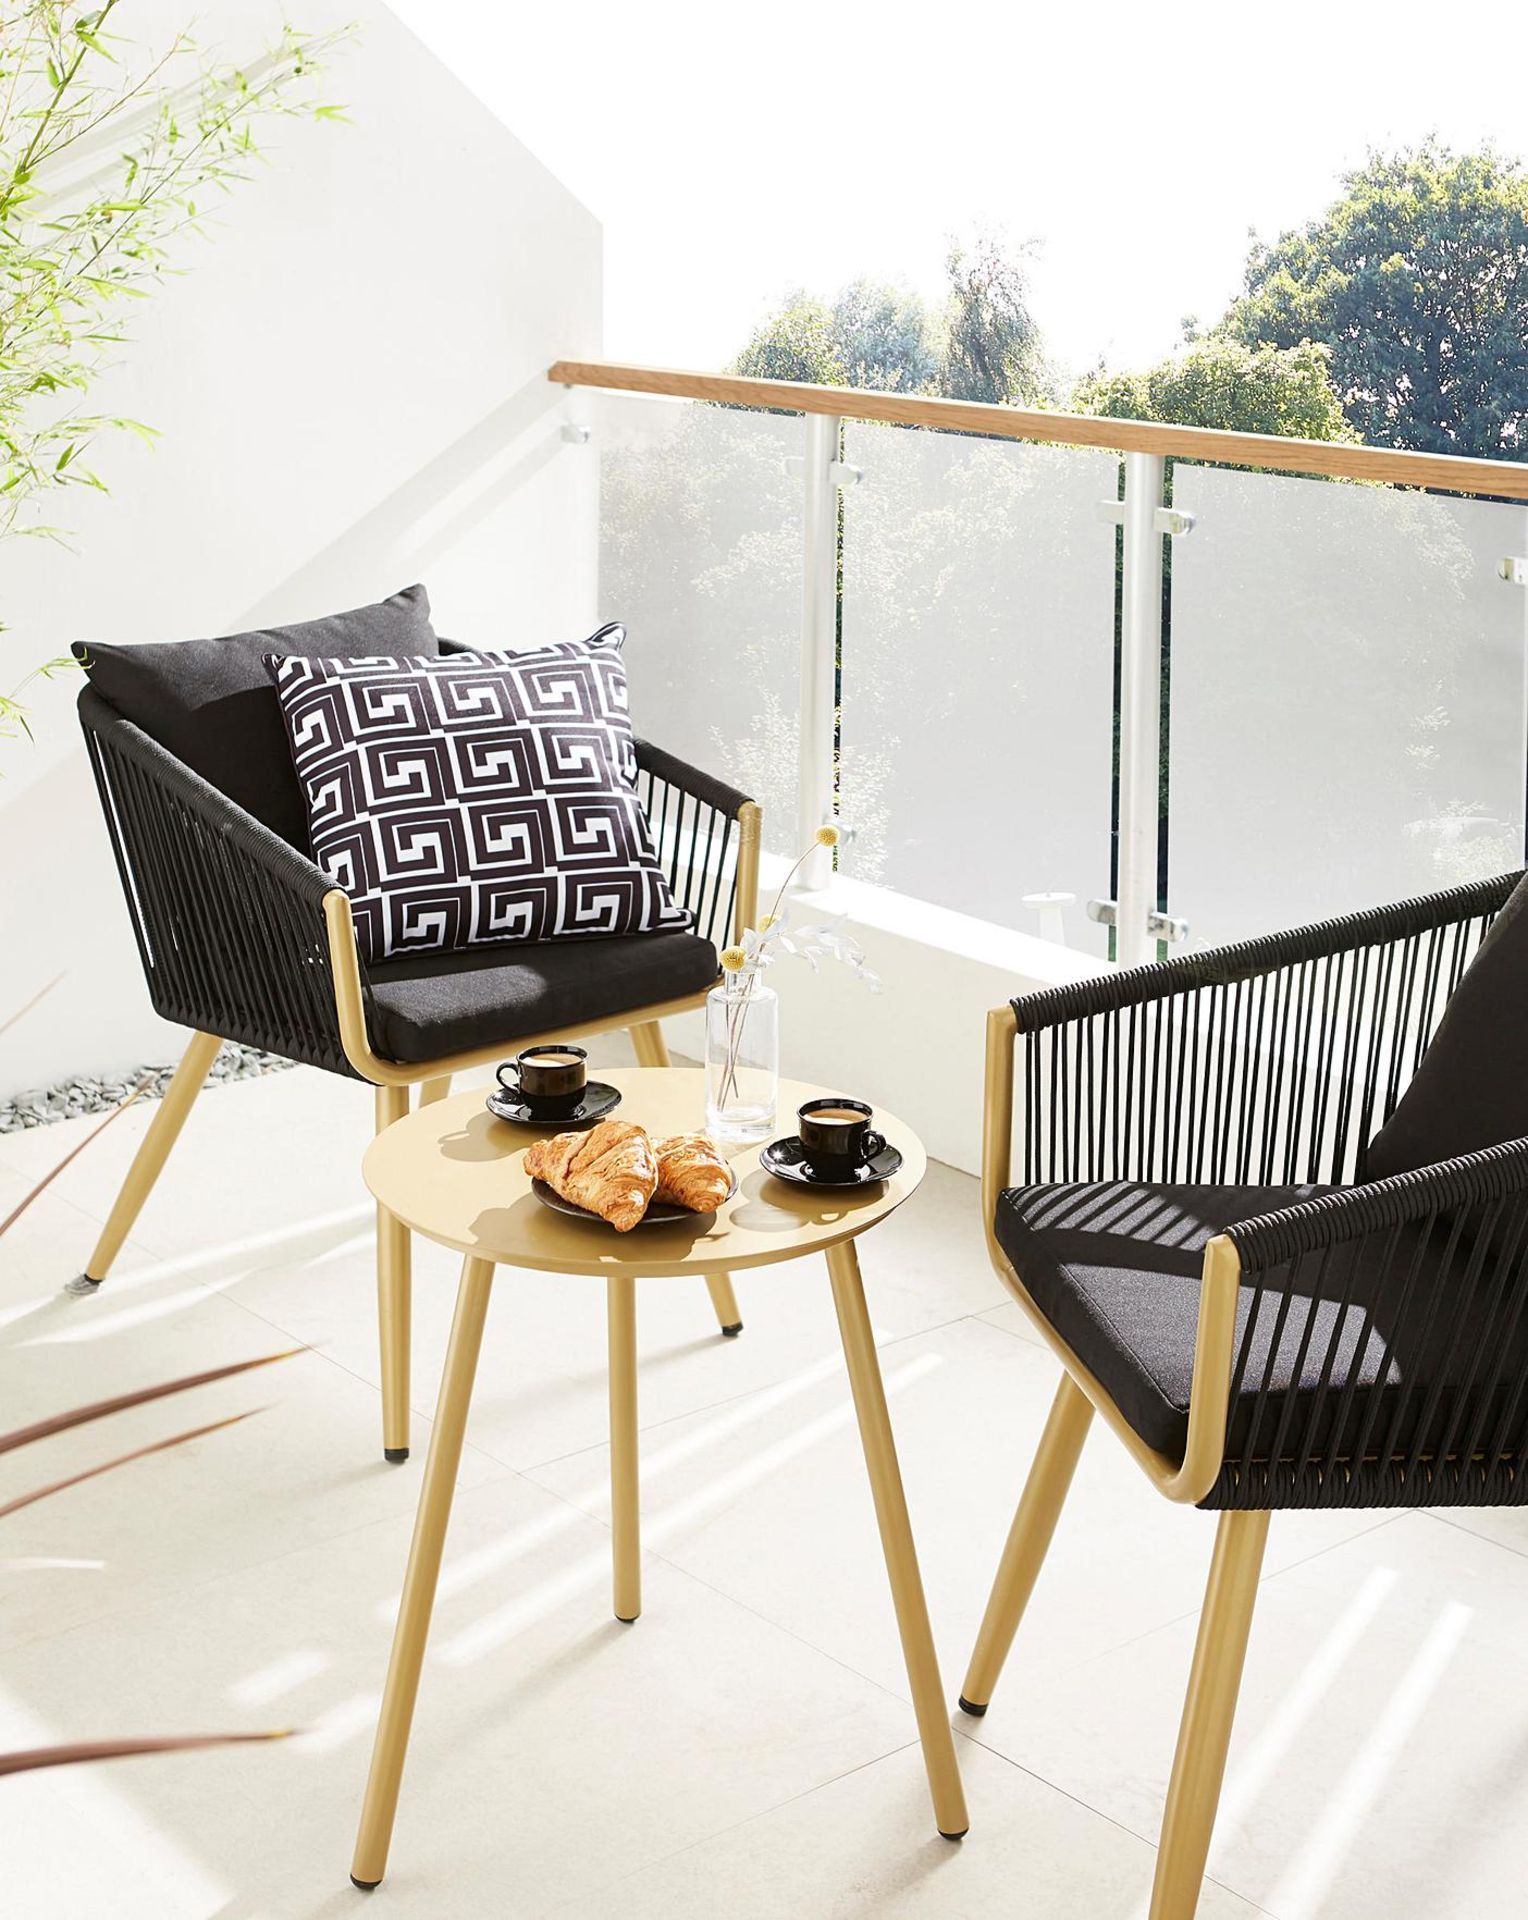 TRADE LOT 4 x New & Boxed Joanna Hope Naya Bistro Set. RRP £379 each. This Exclusive Joanna Hope